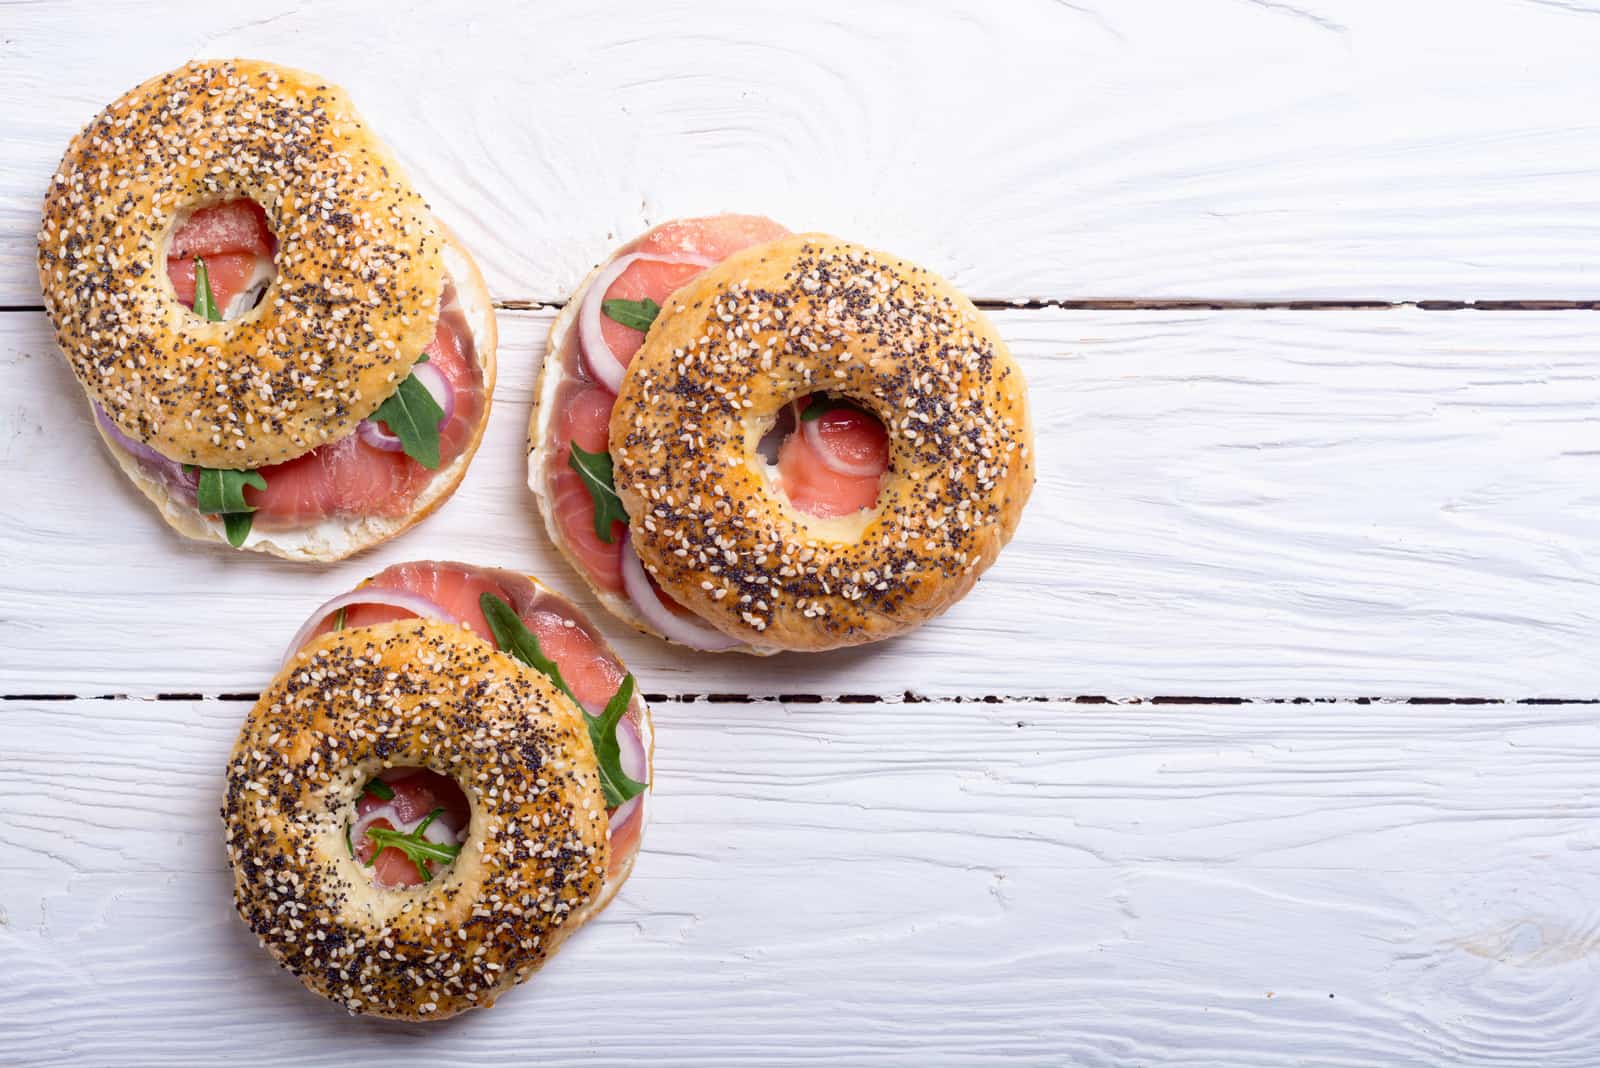 Homemade bagels with salmon and onion